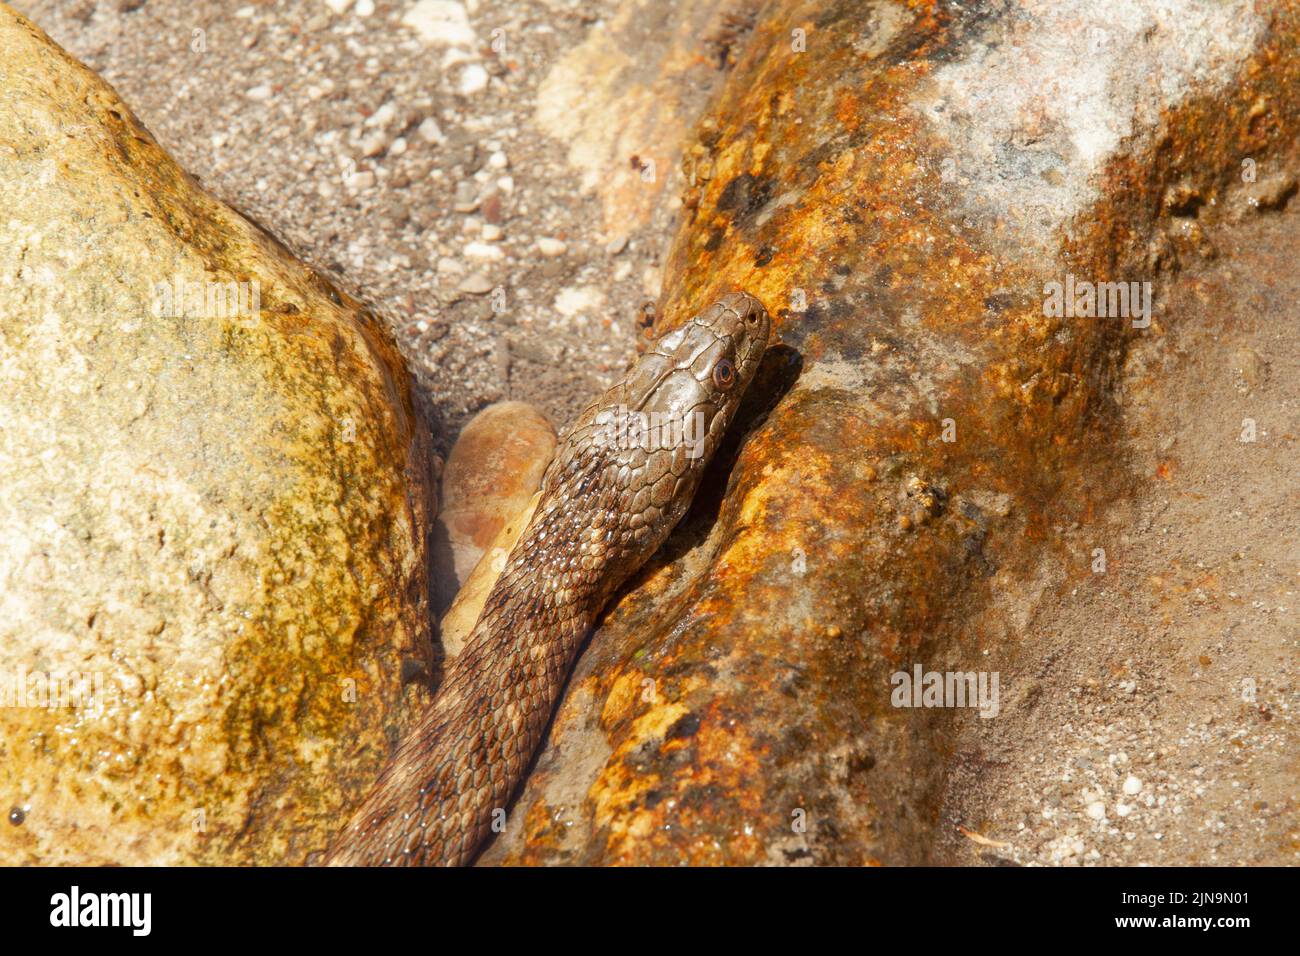 Close-up of a dice snake crawling on the rock Stock Photo